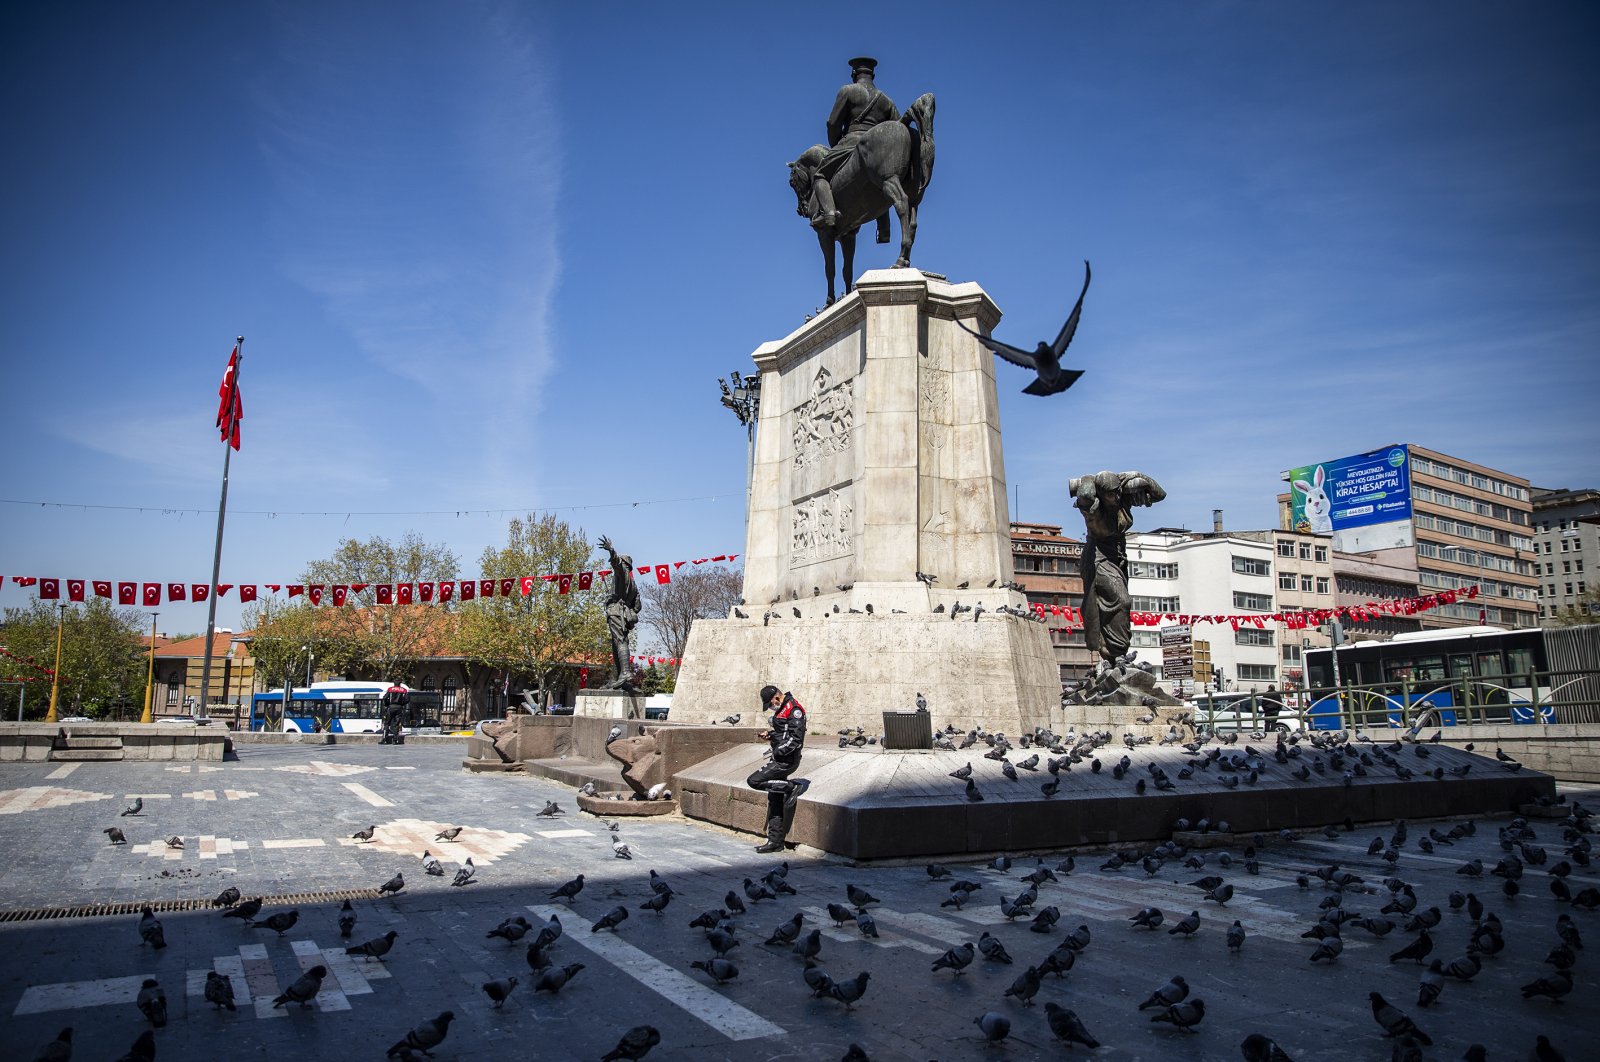 A police officer stands next to a statue at otherwise busy Ulus Square, in Ankara, Turkey, April 28, 2020. (AA Photo)